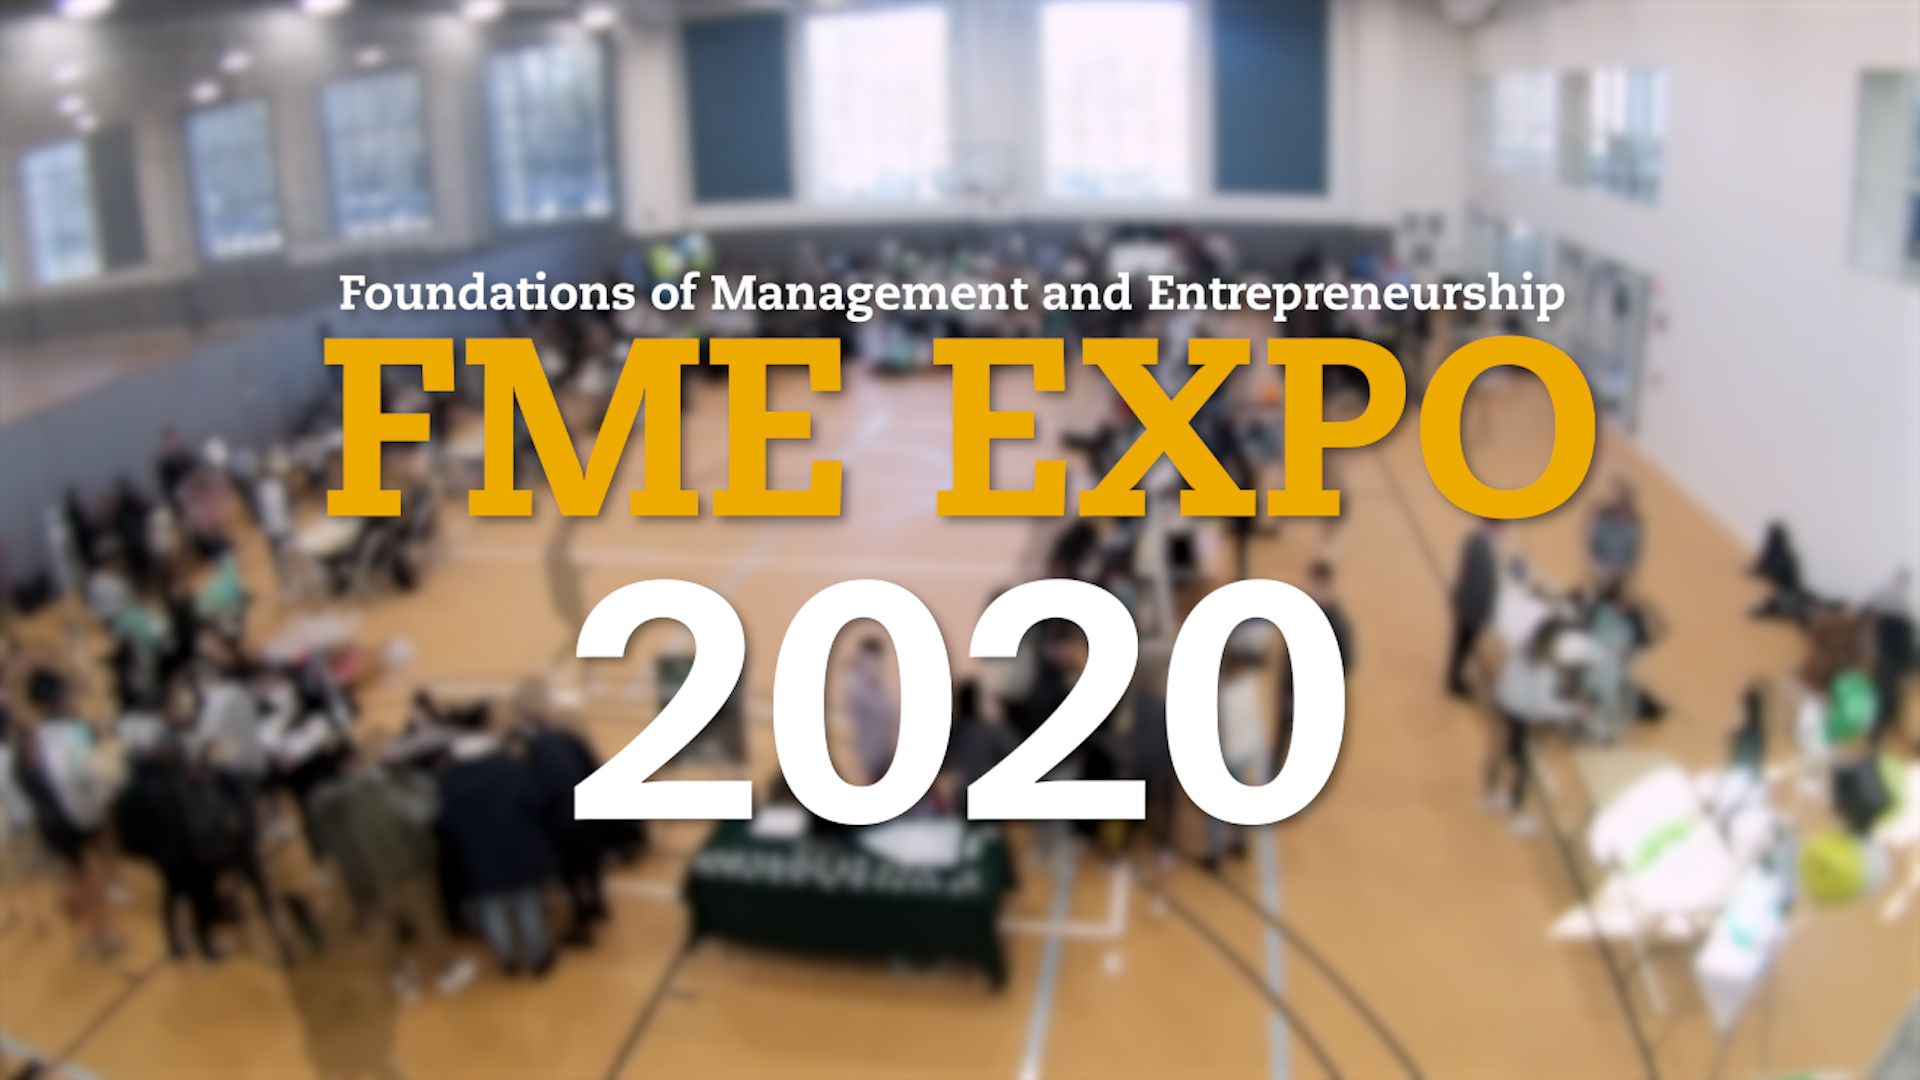 2020 FME Expo Video Title Graphic